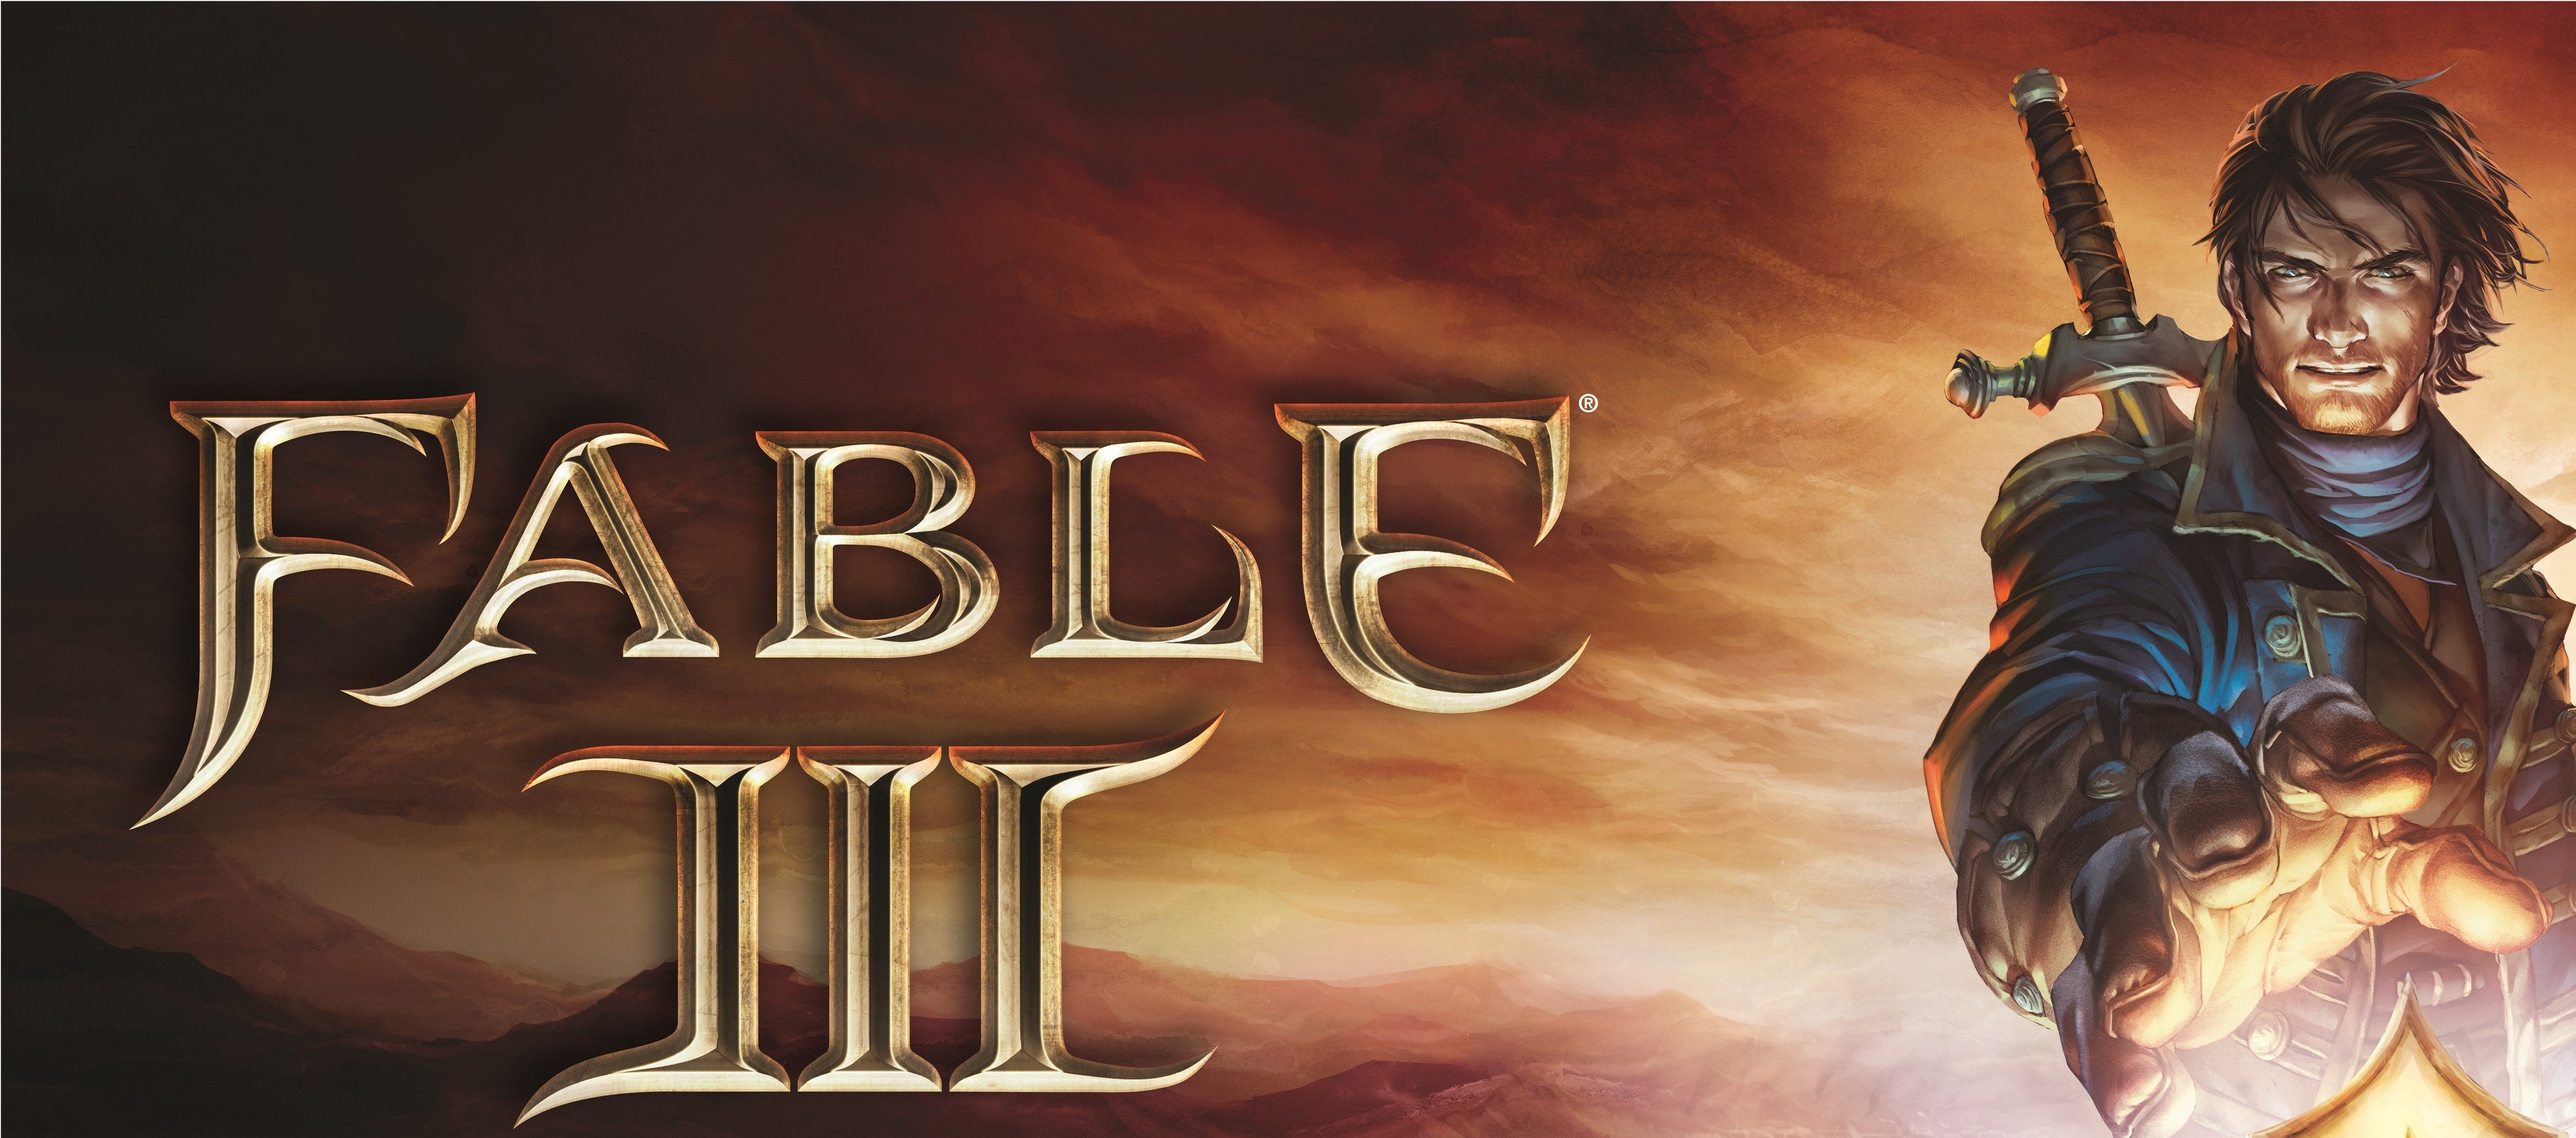 Rogue fable steam фото 92